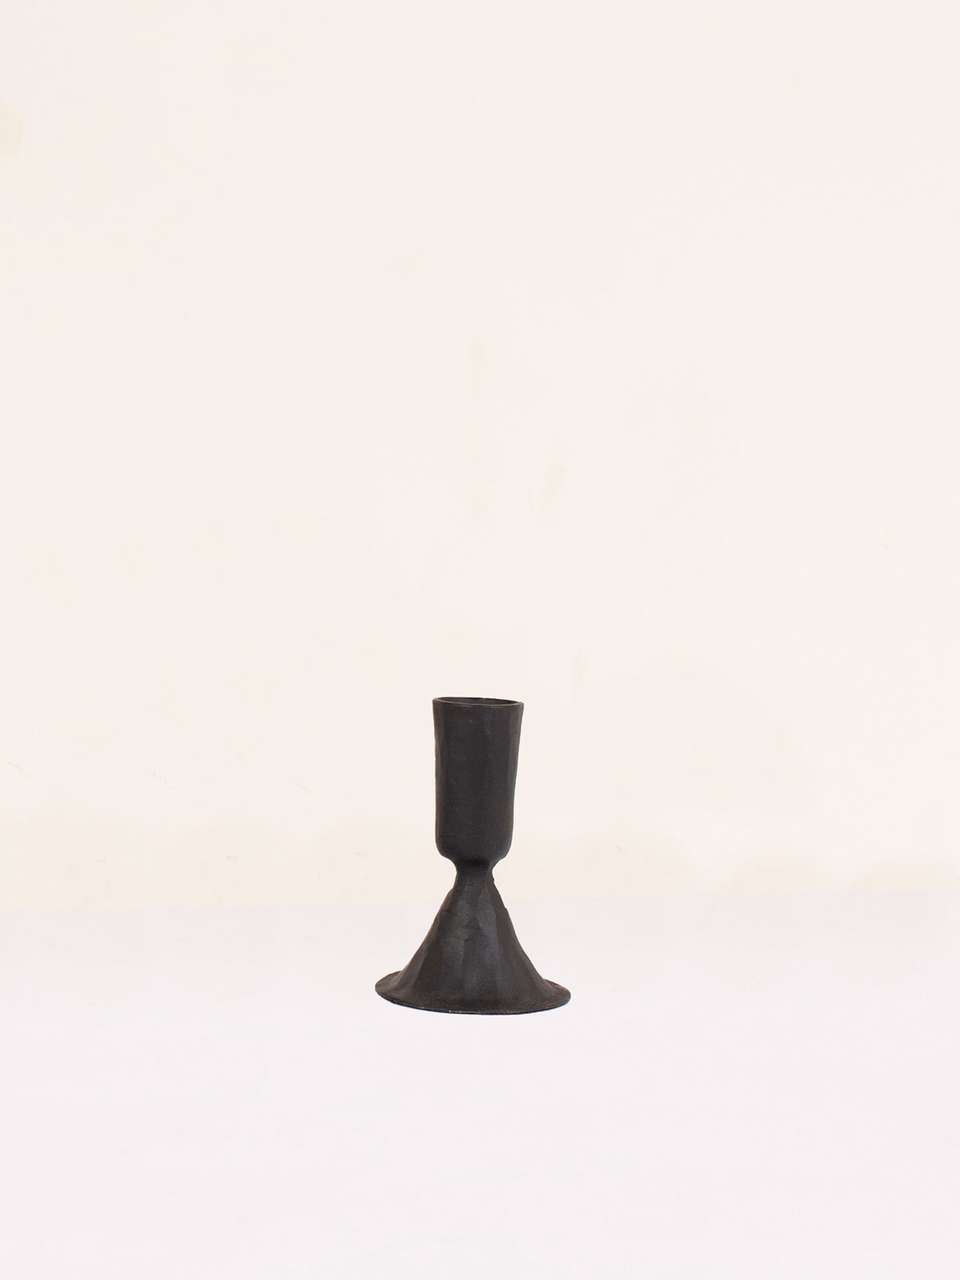 Small Candle Holder, Austen image